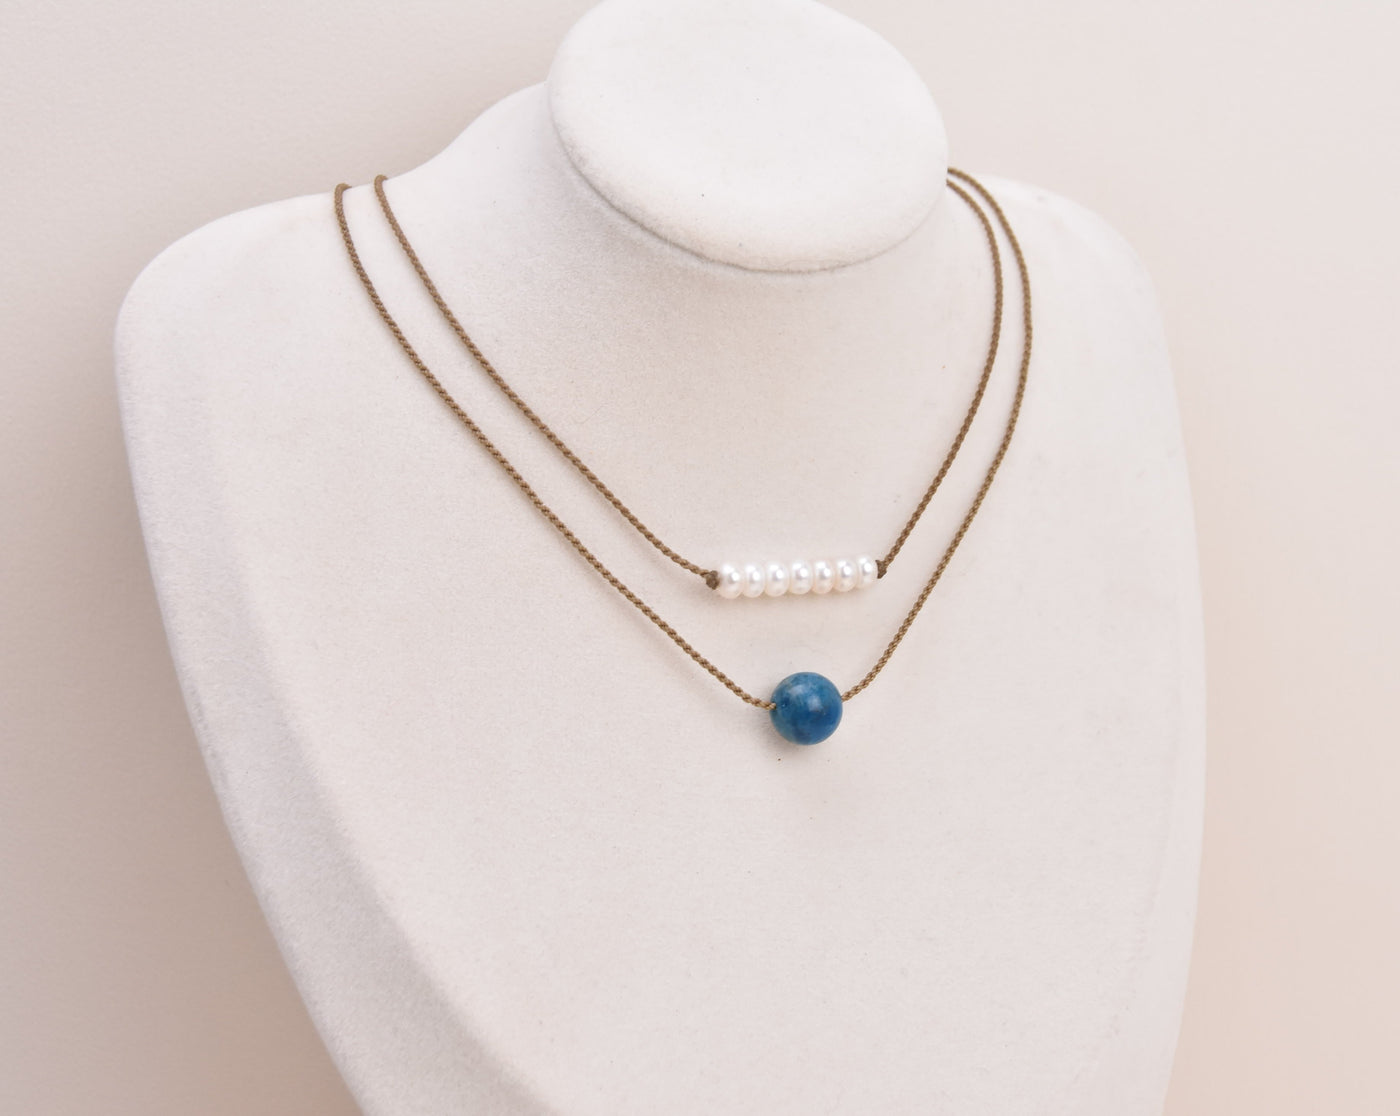 Coastal Cowgirl - Necklace Stack (10% off)